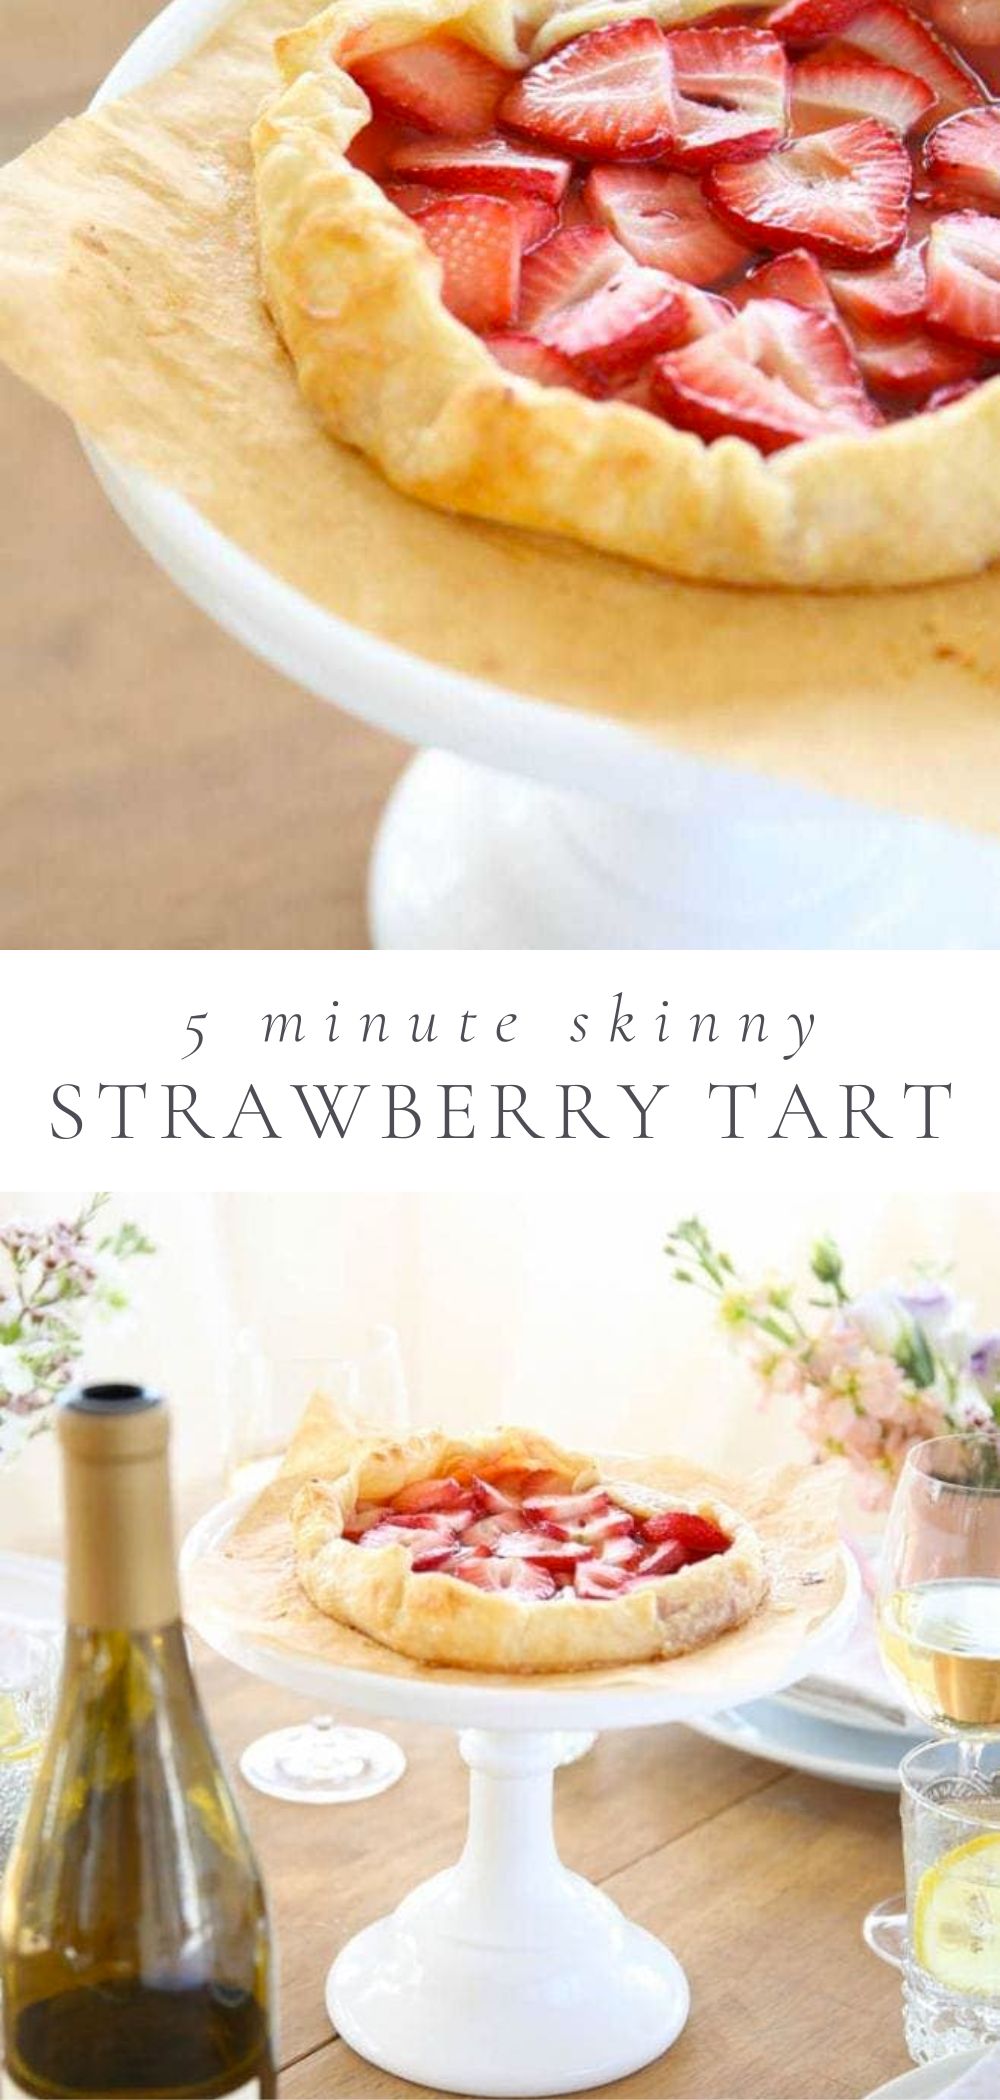 5 minute skinny strawberry tart is pictured on a white display stand on a wooden table